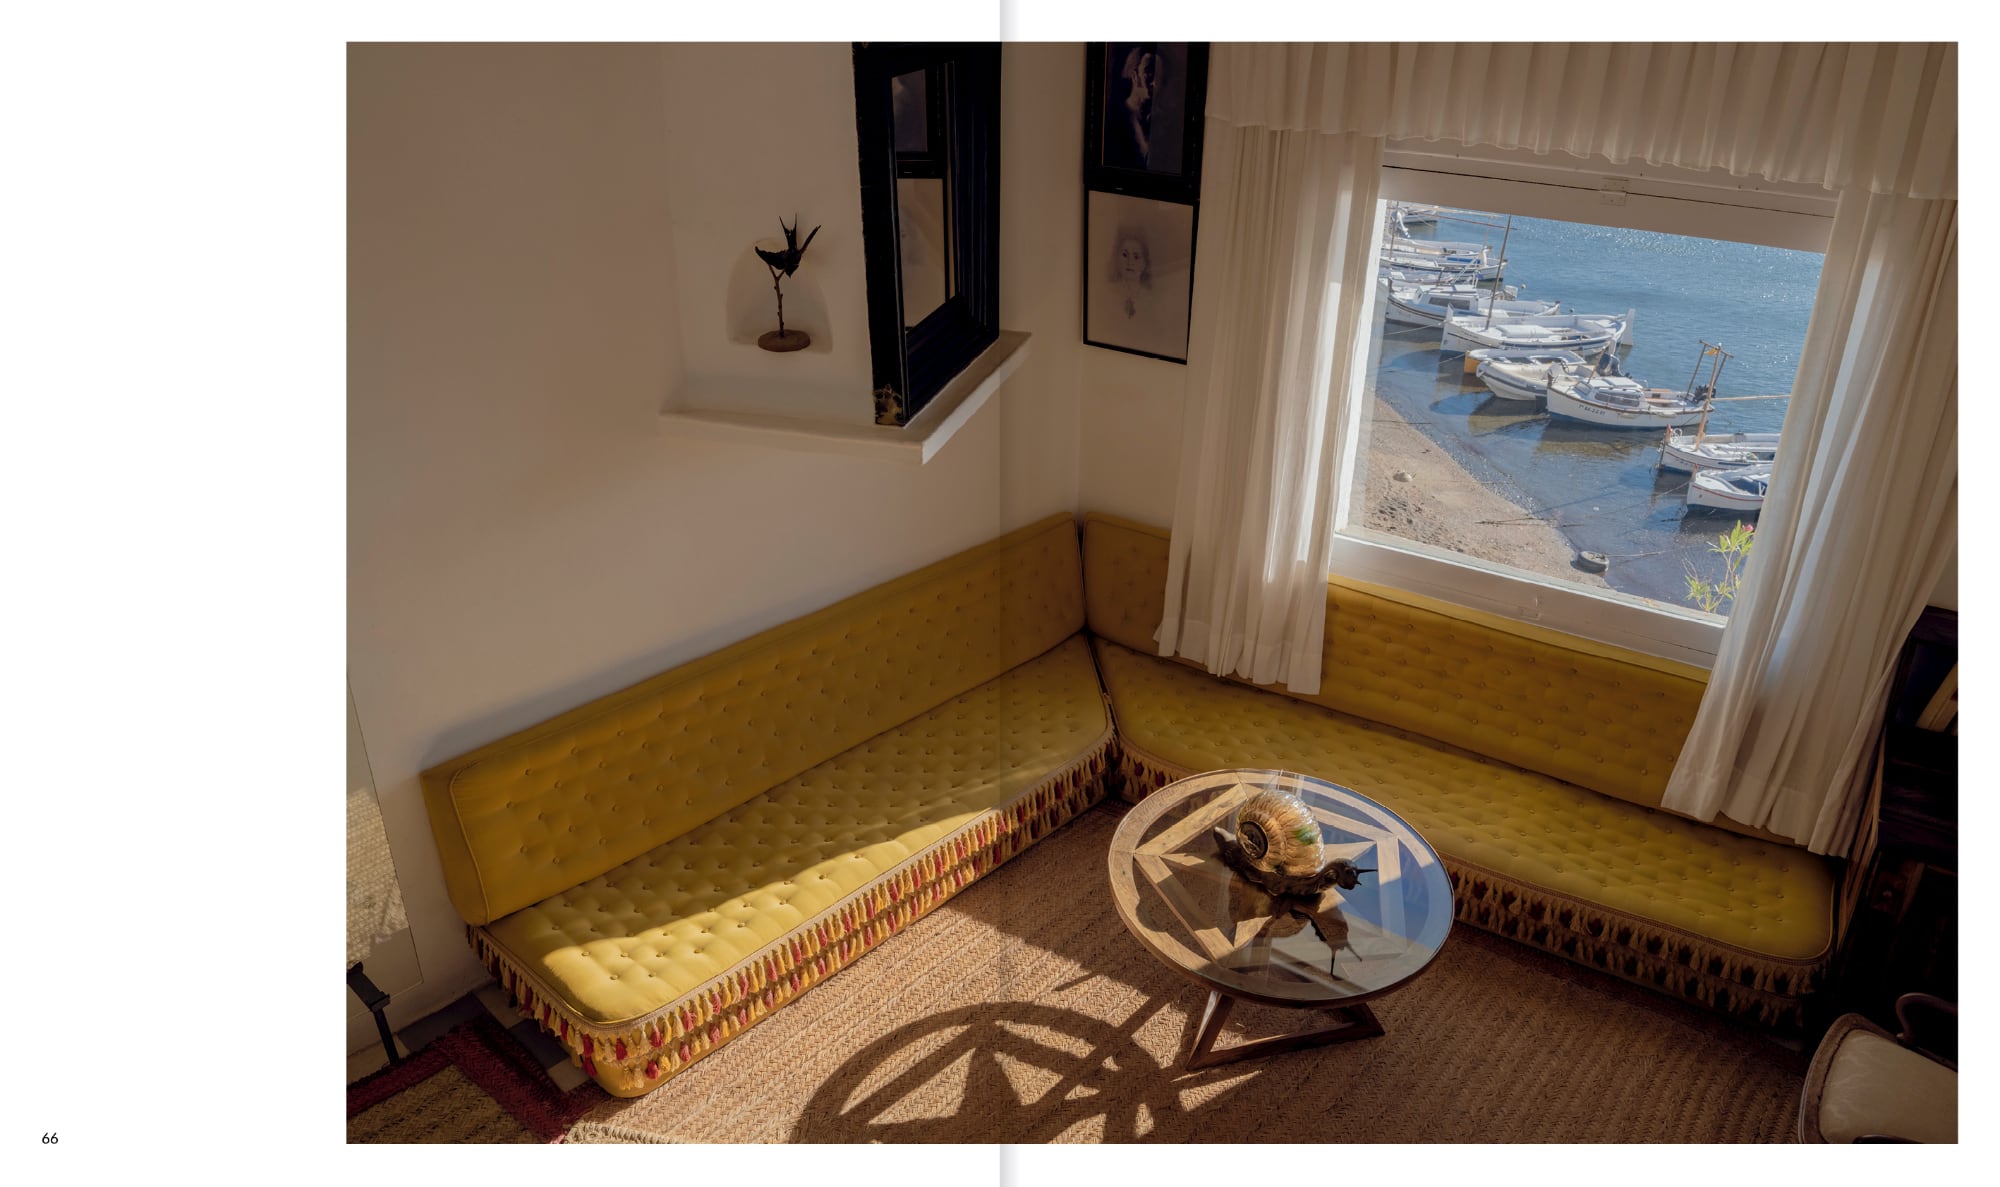 a book spread open to one image of a yellow L-shaped couch with a window on the right side looking down to the beach with small fishing boats docked